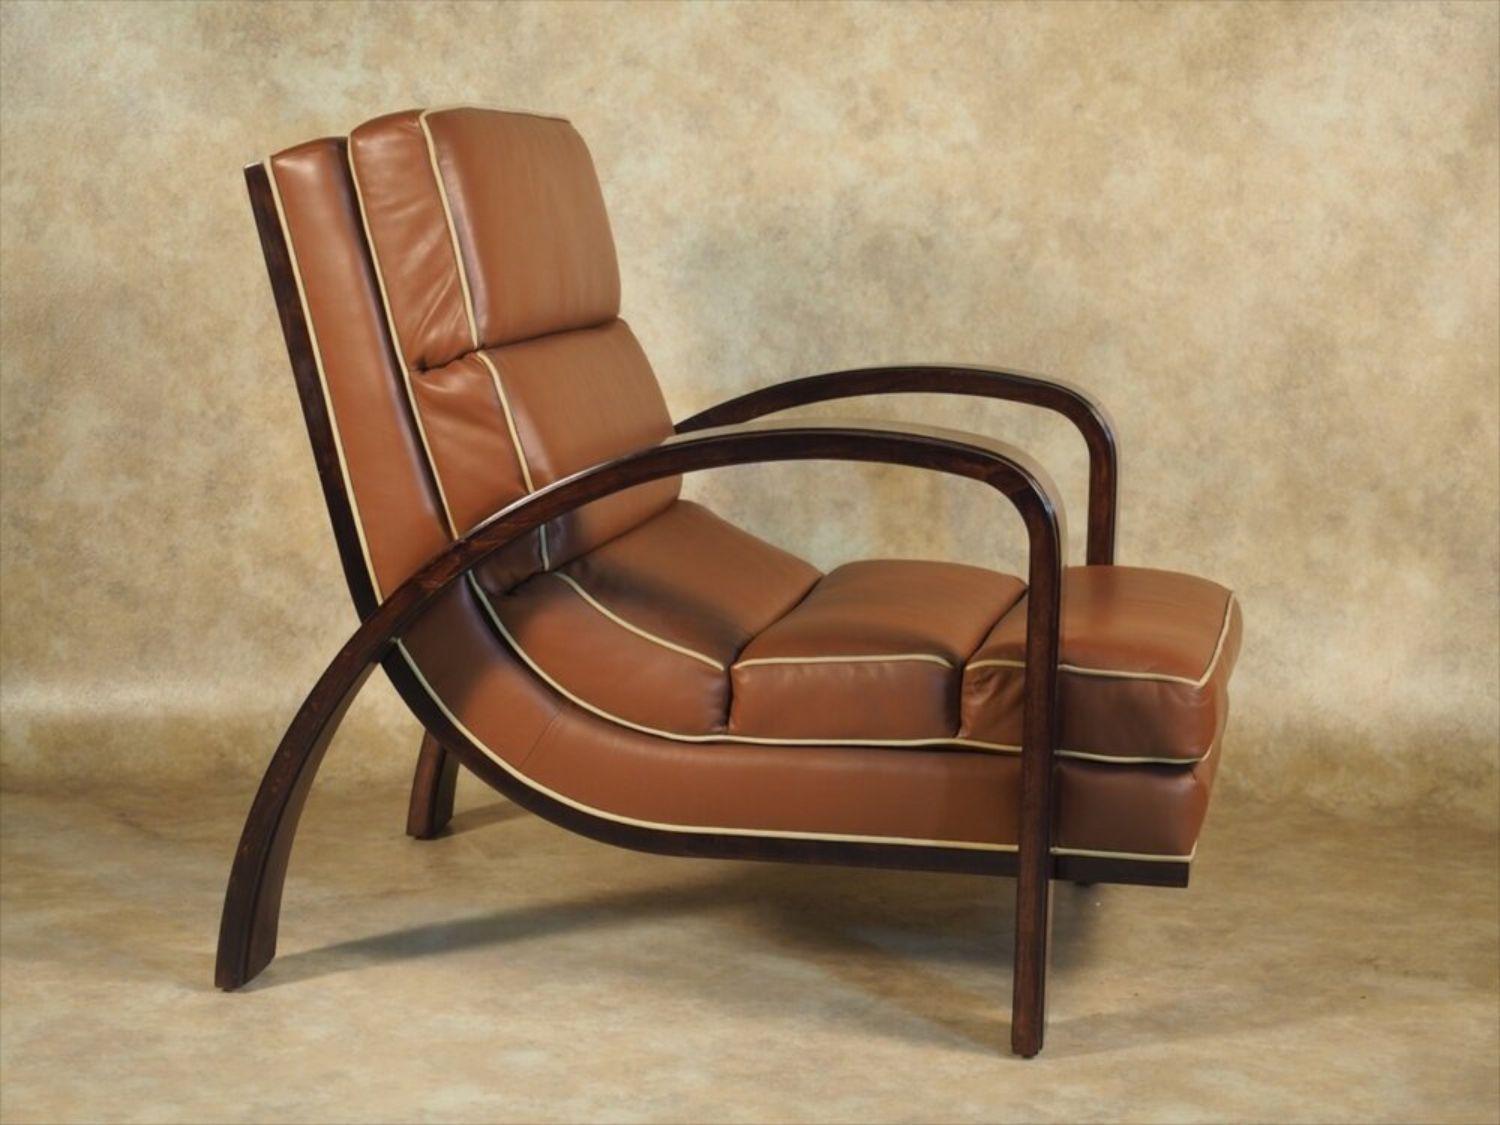 20th Century Lucie Renaudot, Large-Scale Modernist Armchair For Sale